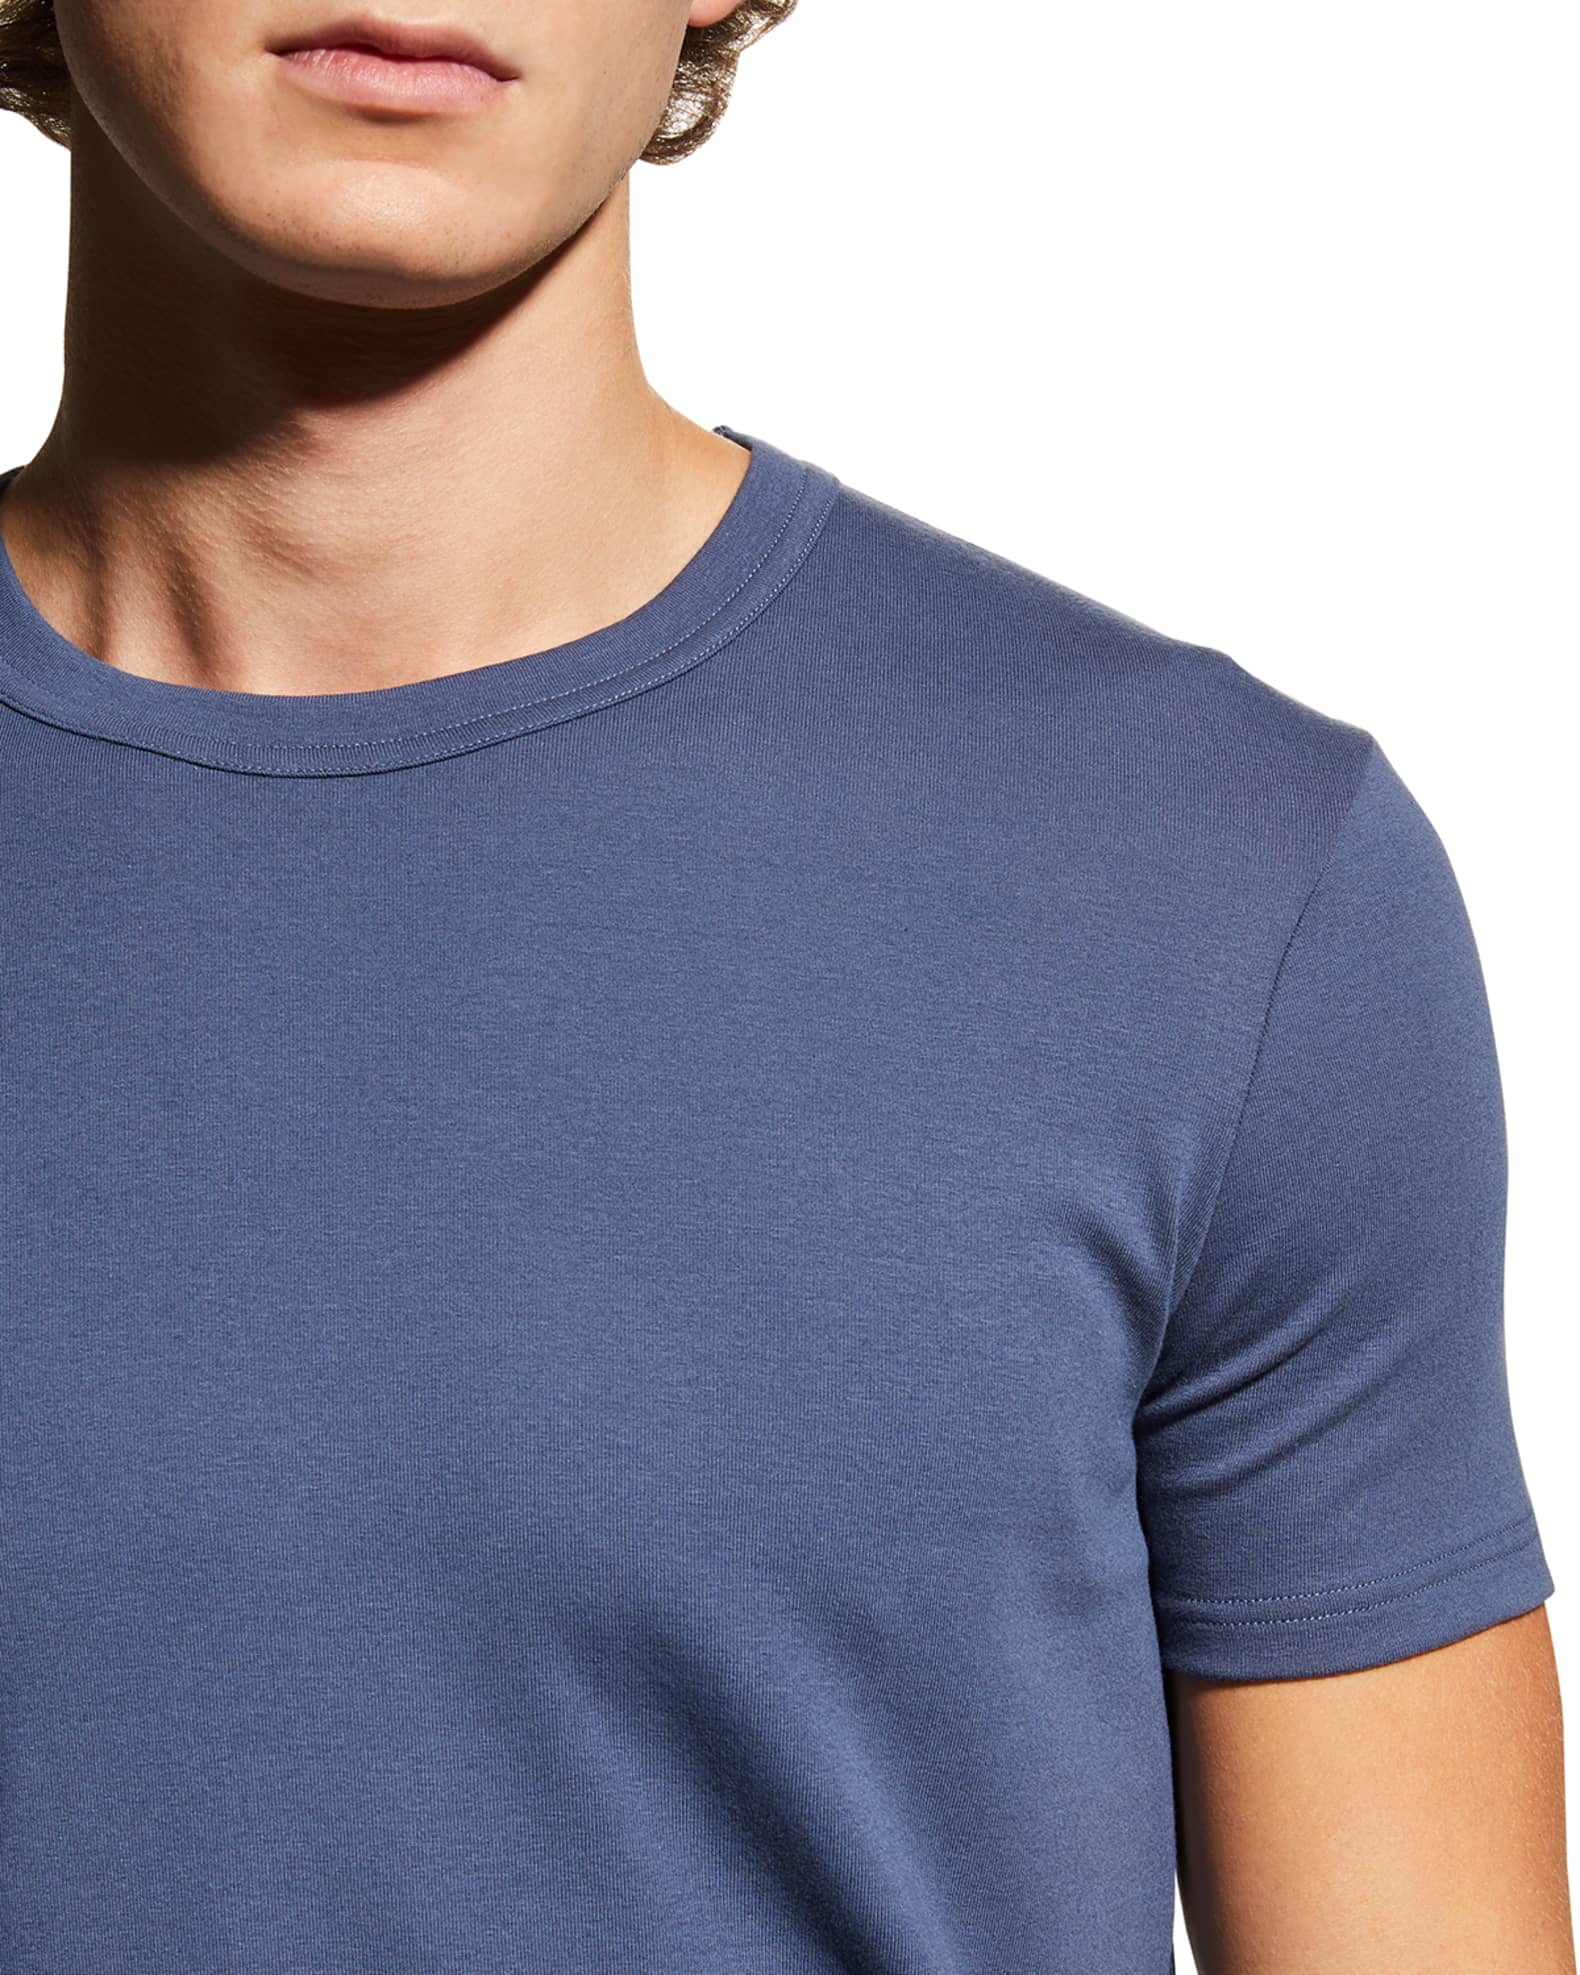 TOM FORD Men's Solid Stretch Jersey T-Shirt | Neiman Marcus